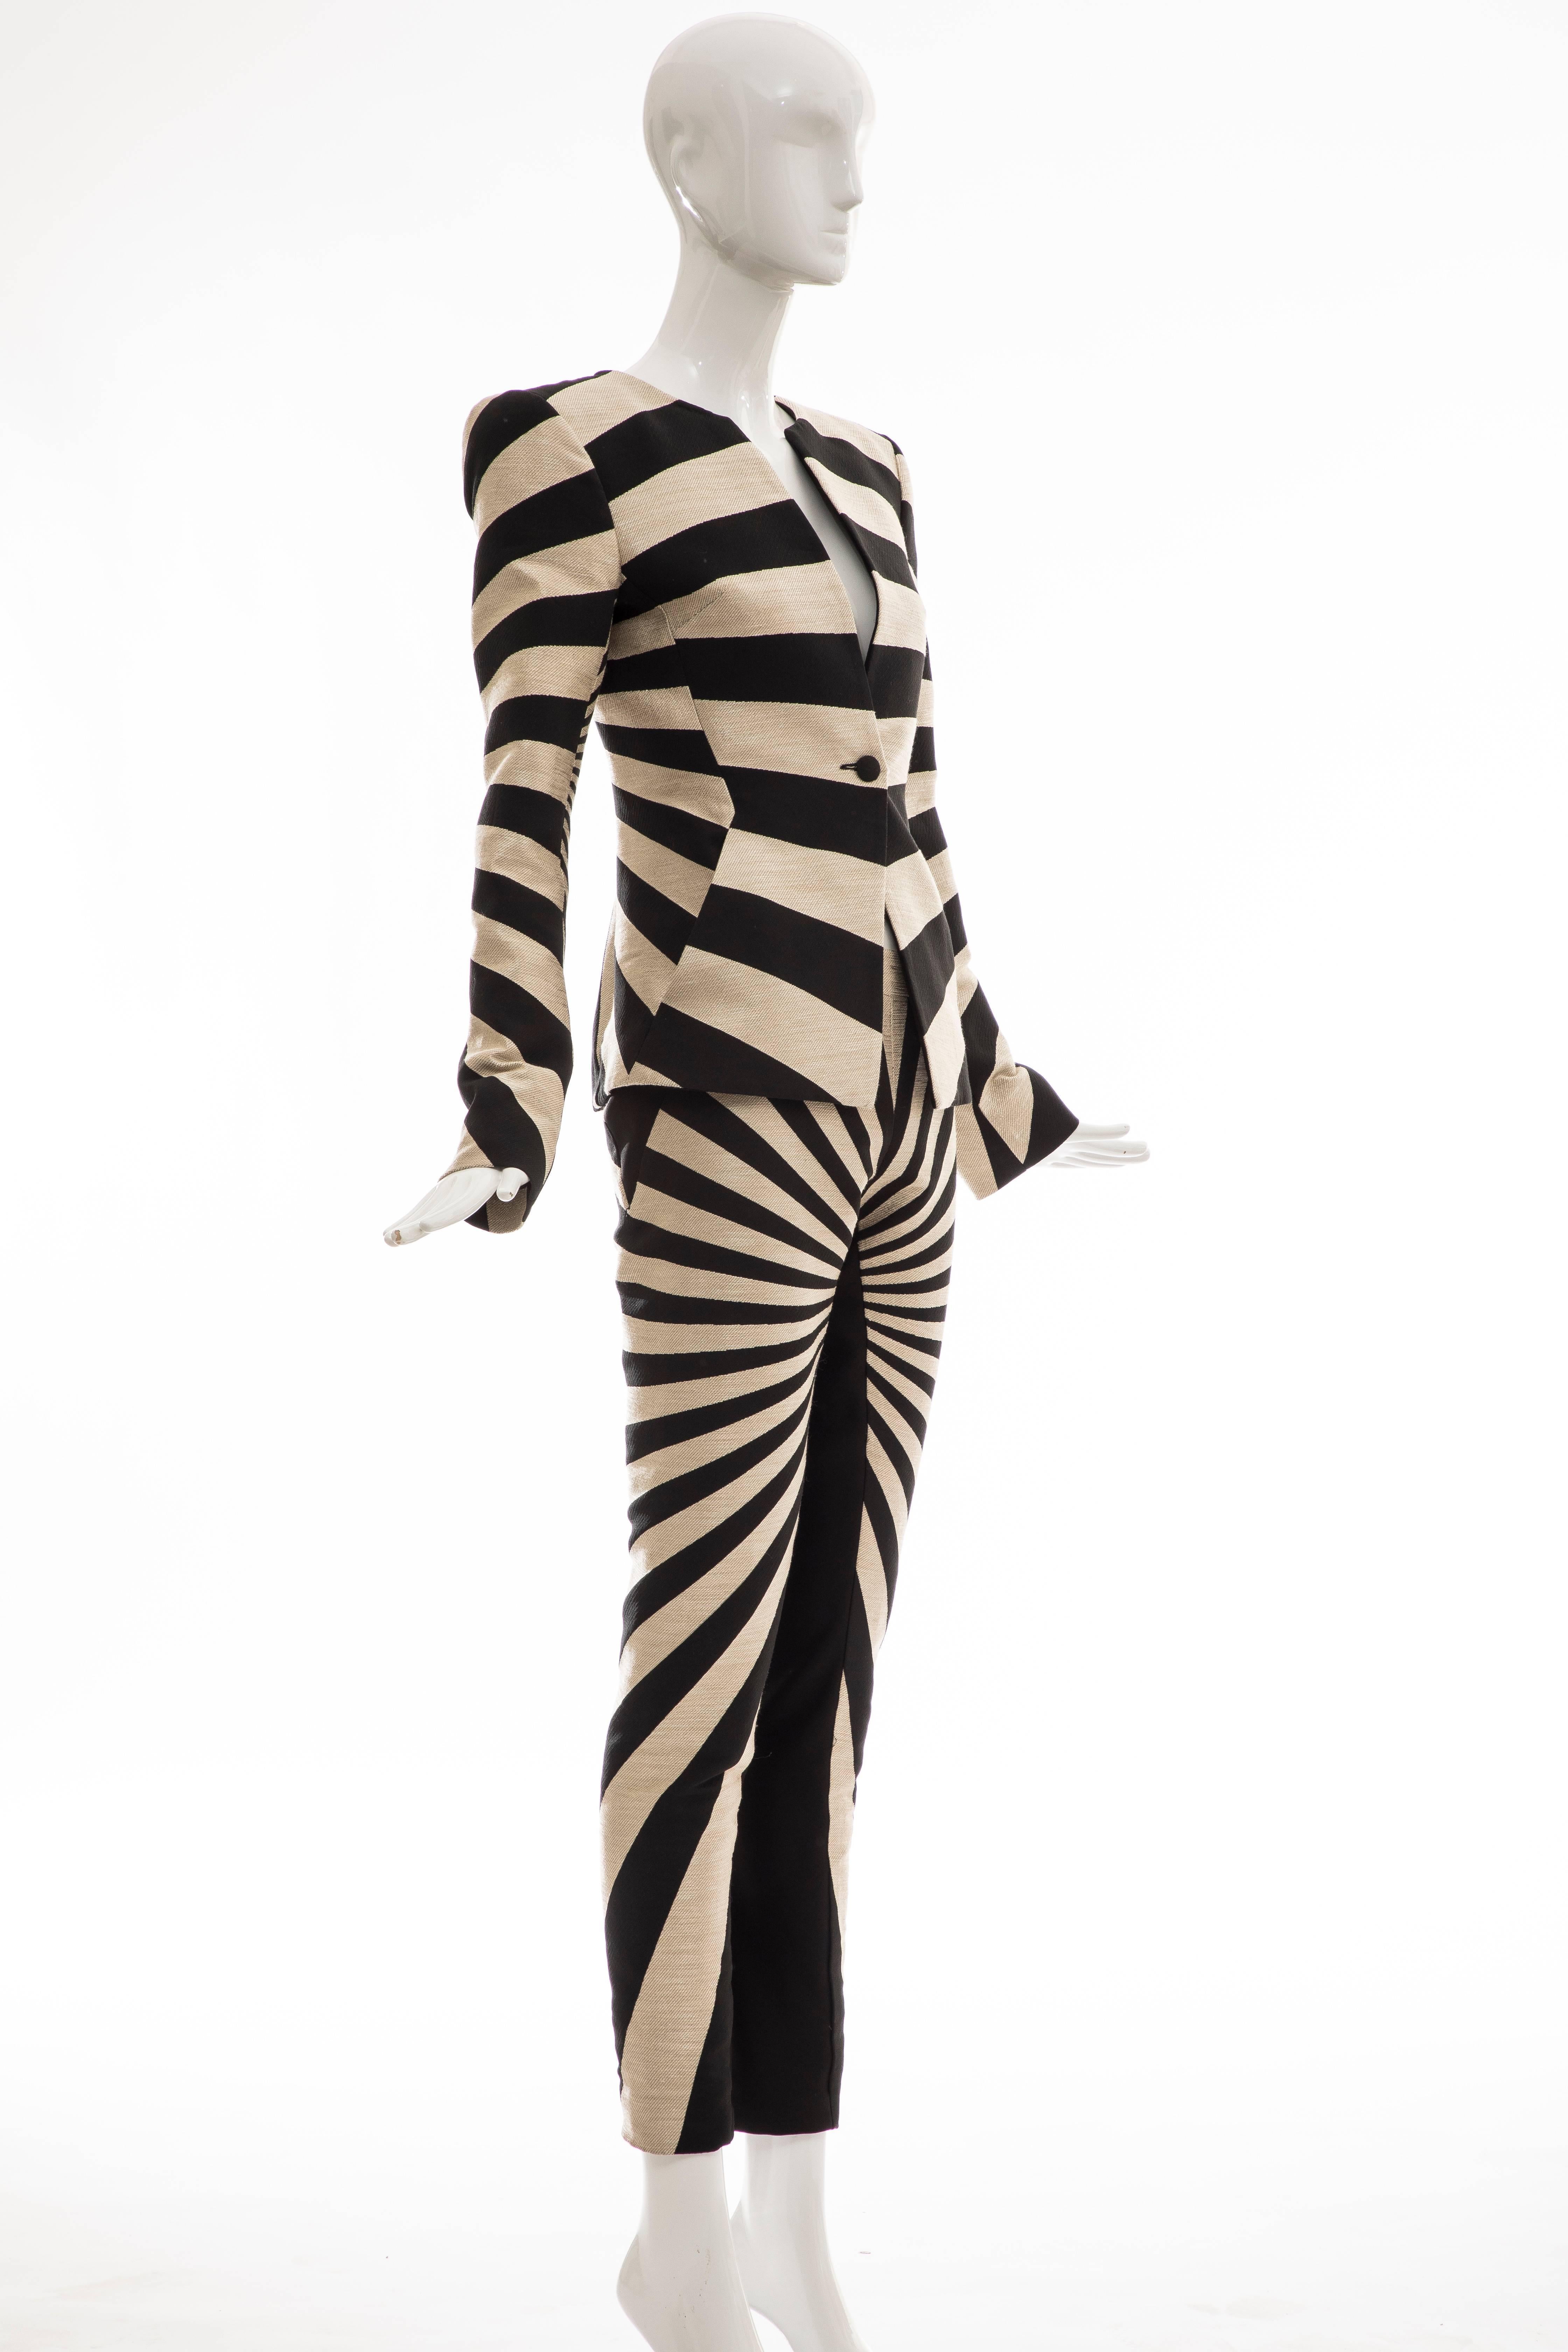 Gareth Pugh Woven Striped Pattern Pantsuit, Spring 2017 In Excellent Condition For Sale In Cincinnati, OH